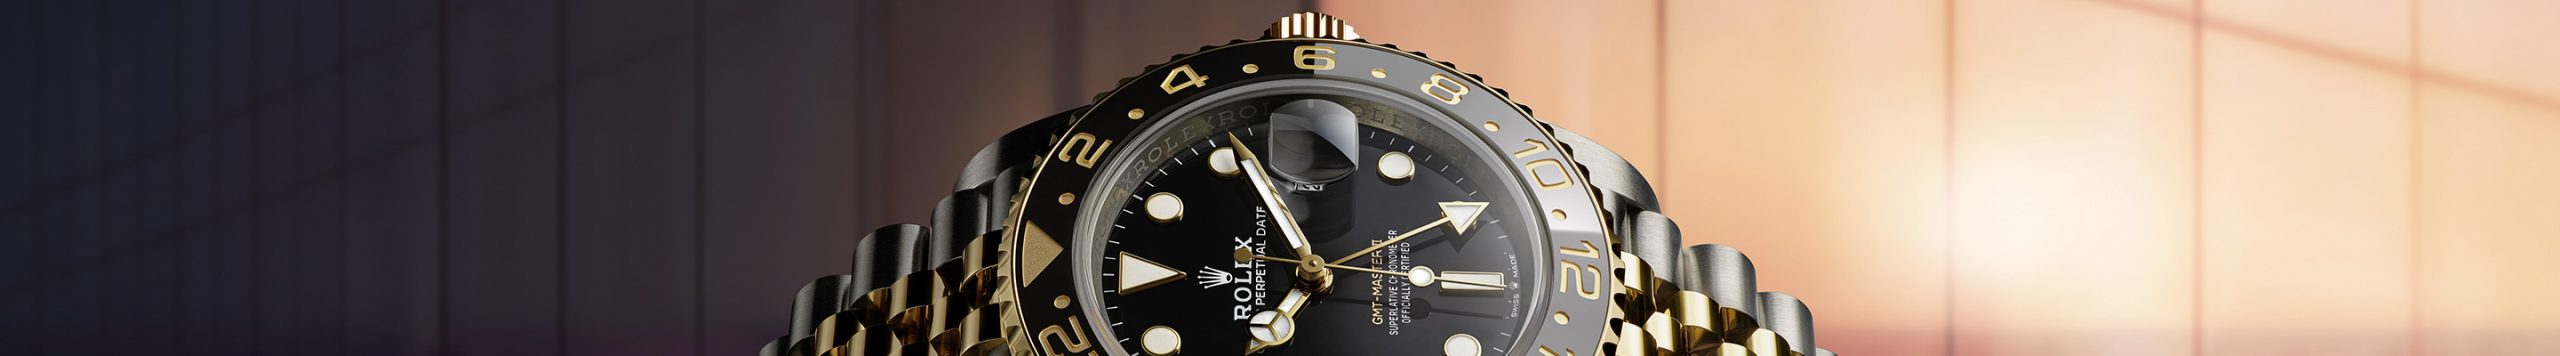 Rolex GMT-Master II | Rolex Official Retailer - The Time Place Singapore